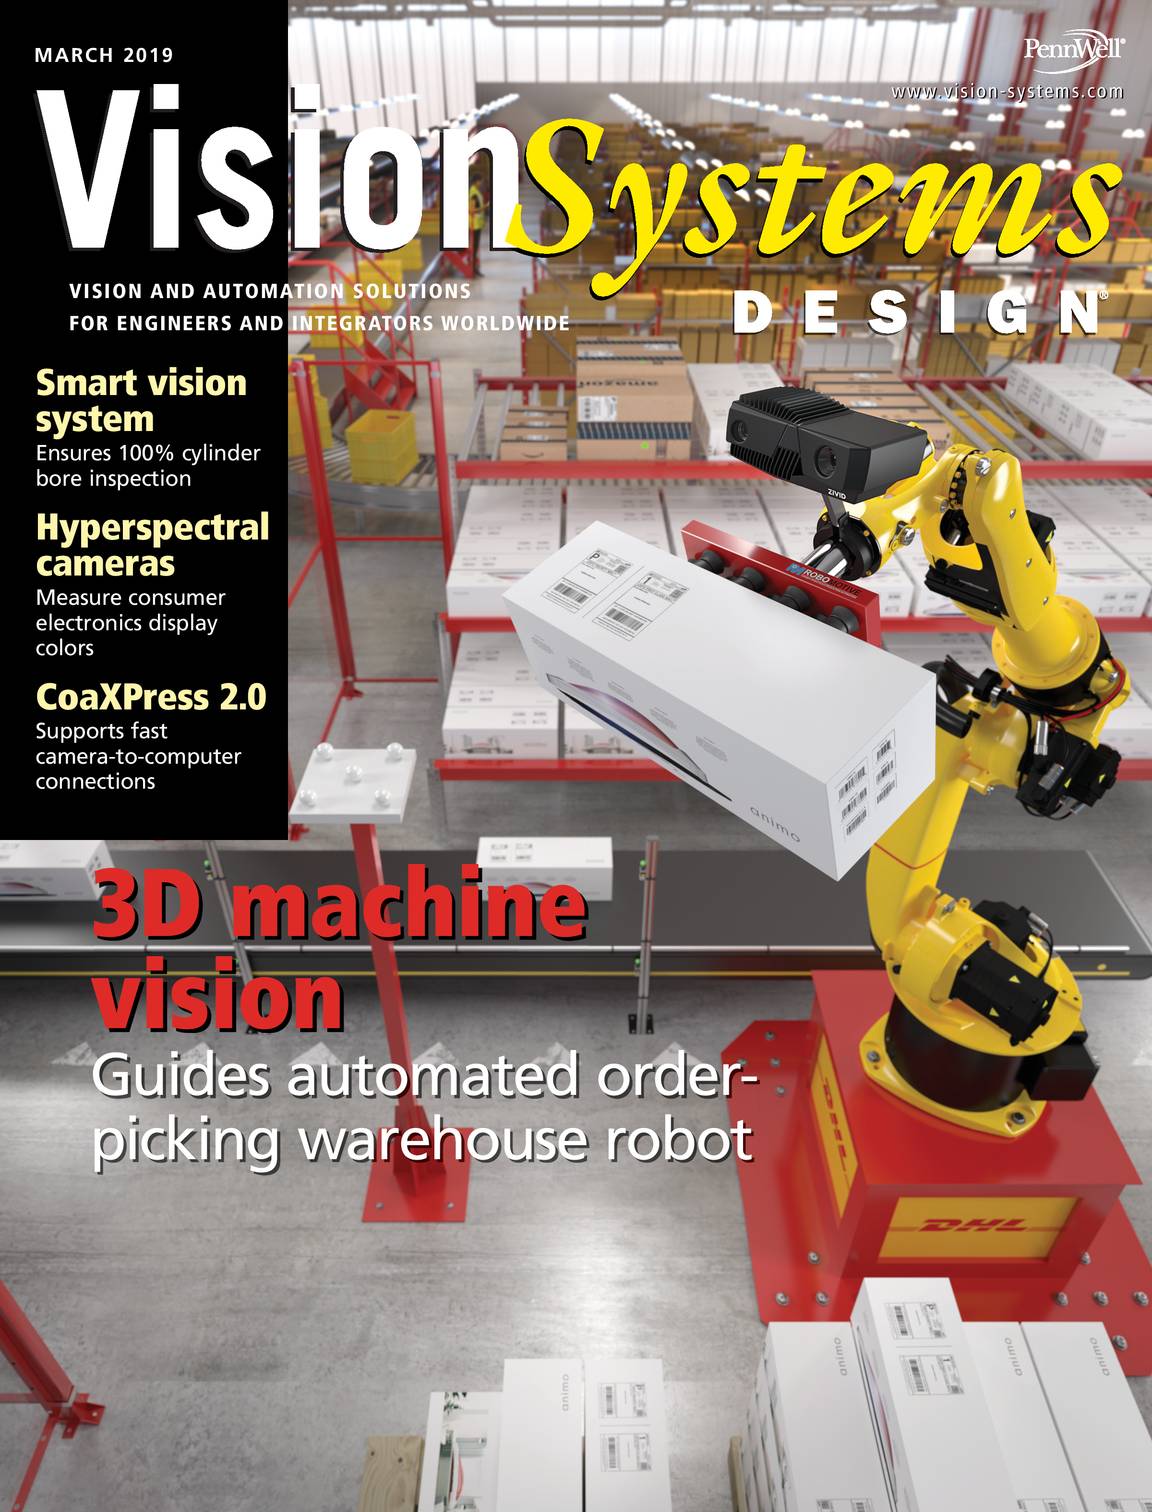 Vision Systems March 2019 Page Cover